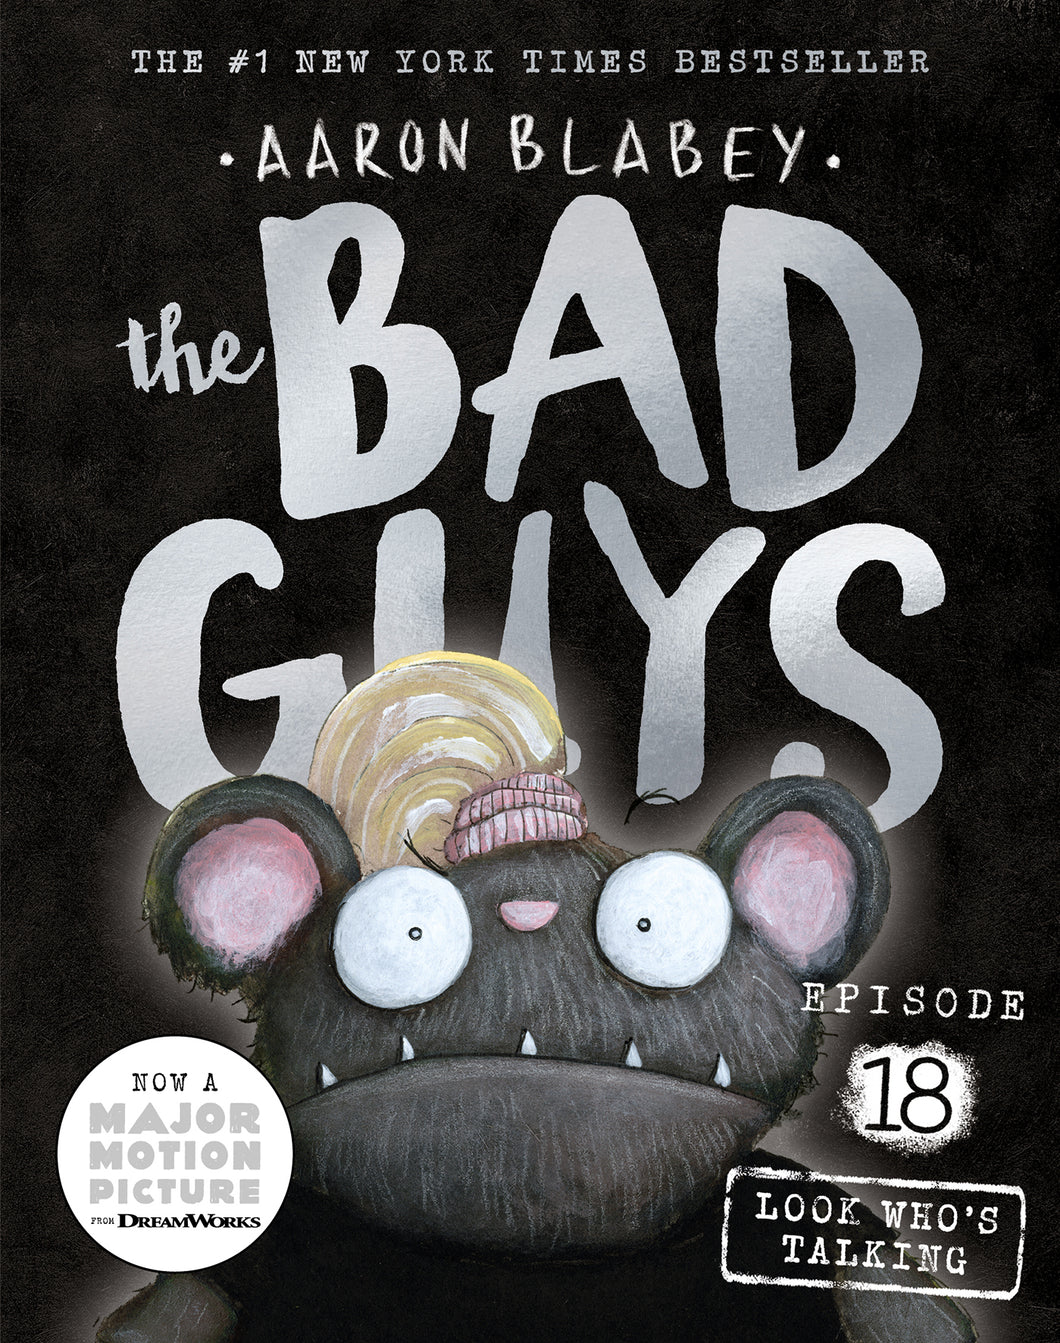 The Bad Guys Episode 18 Look Who's Talking by Aaron Blabey